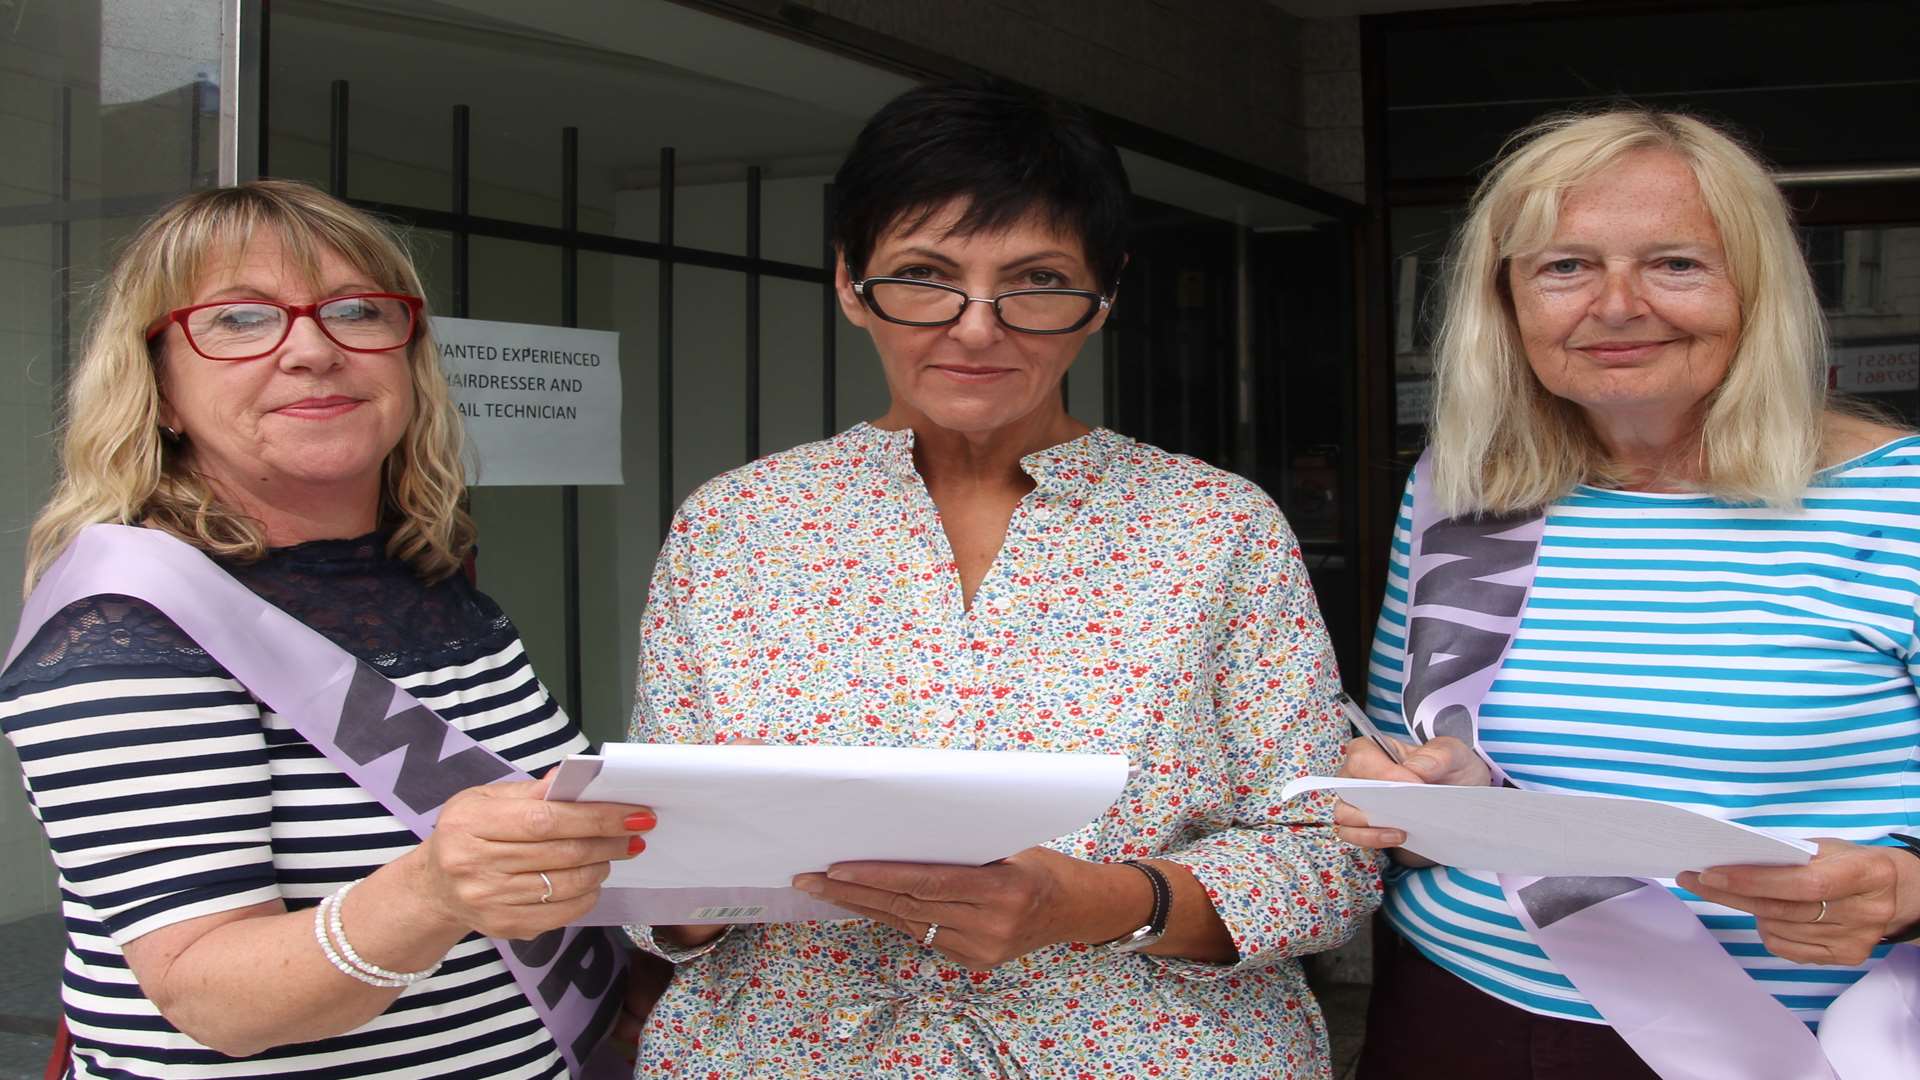 Penny Wells, left, and Leilah Leask, right, talk to Marla Madison about pension arrangements and the Waspi campaign